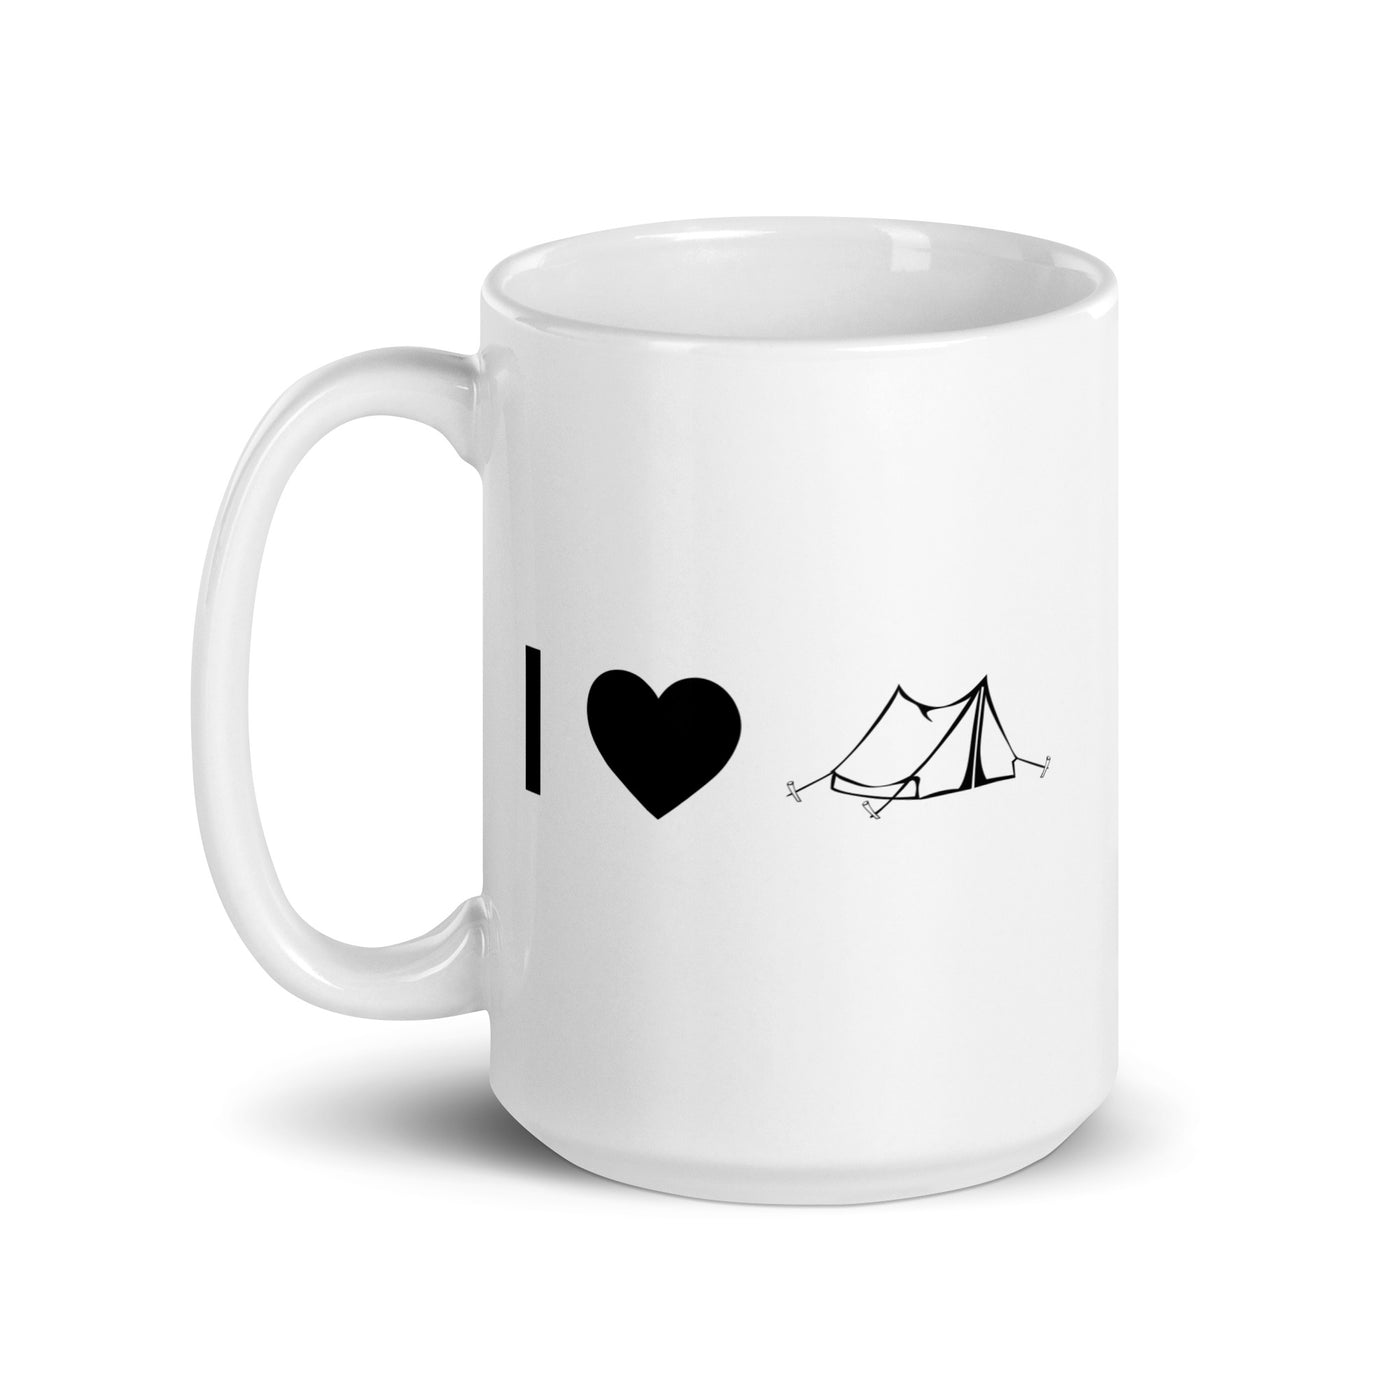 I Heart And Camping Tent - Tasse camping